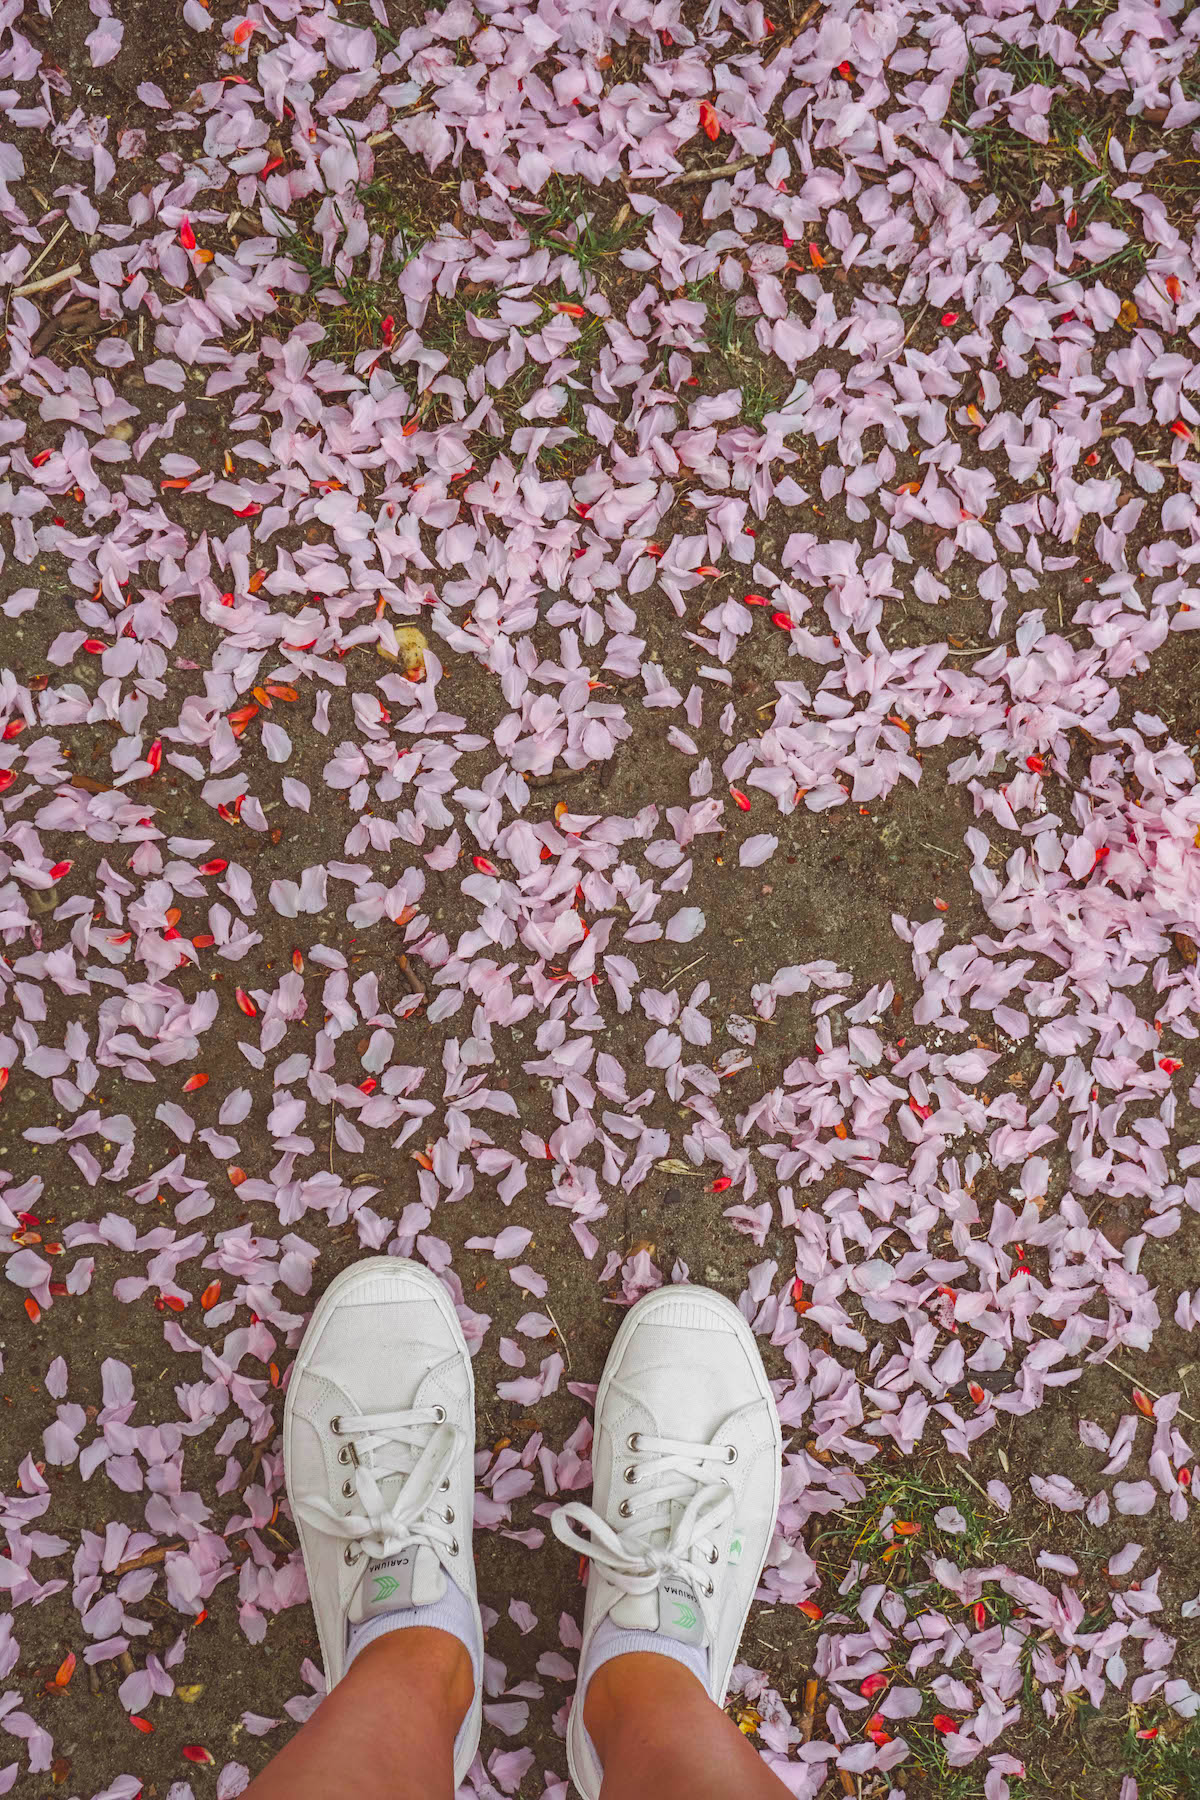 Cherry blossom petals fallen on the ground, you also see white tennis shoes